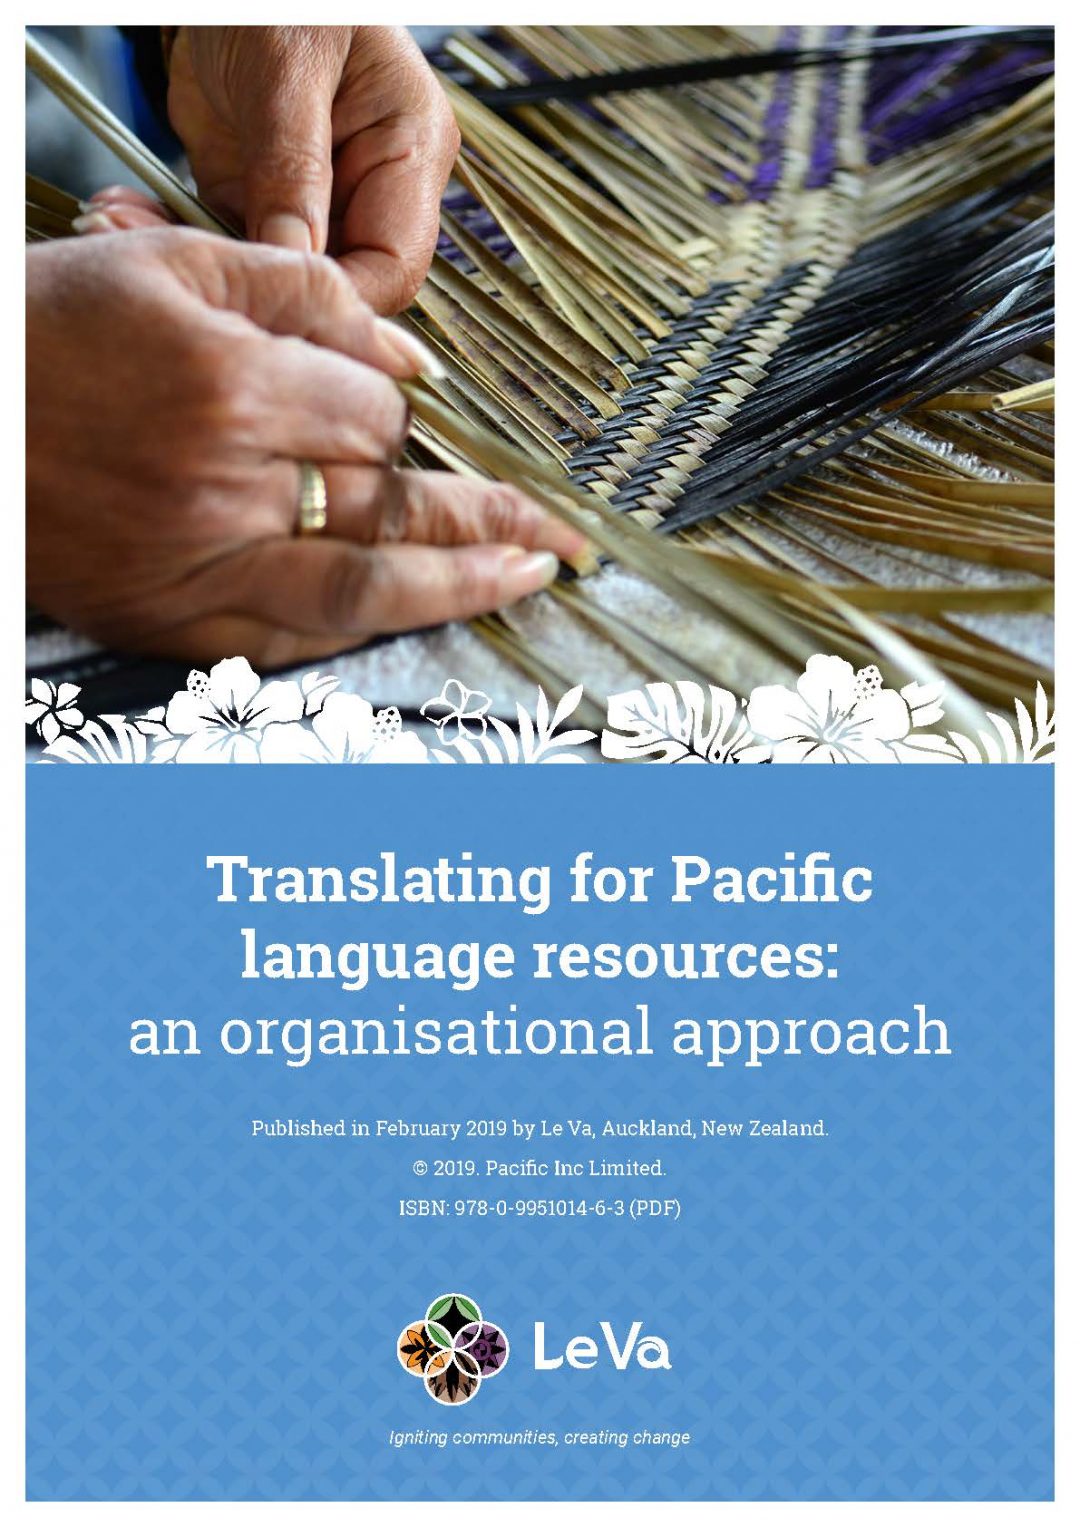 Translating for Pacific language resources: an organisational approach